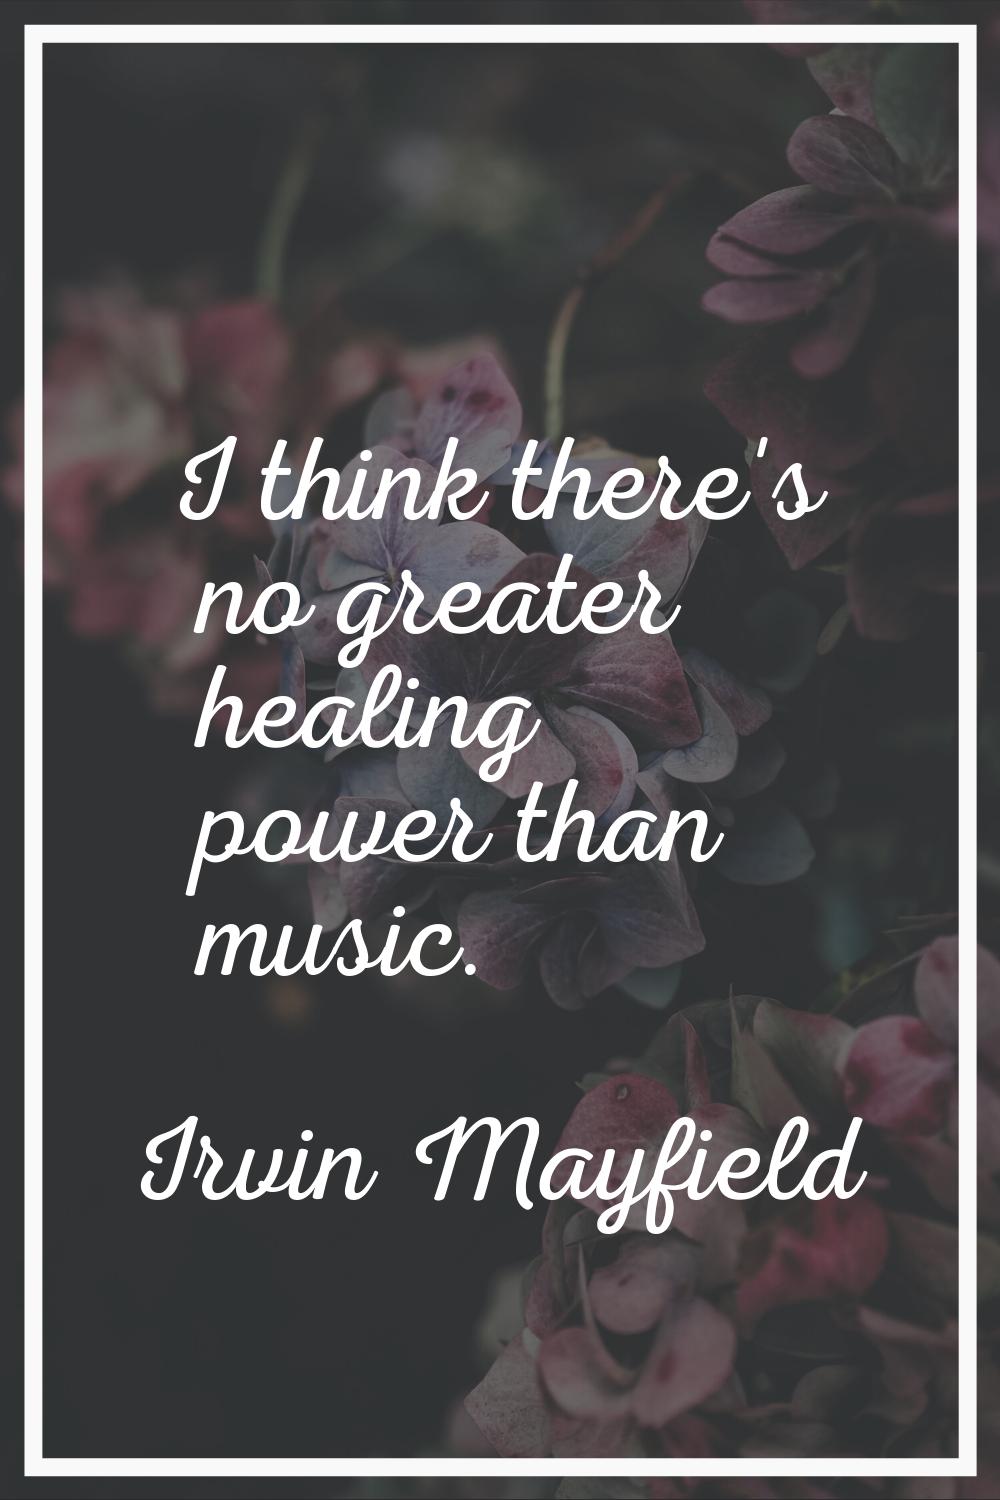 I think there's no greater healing power than music.